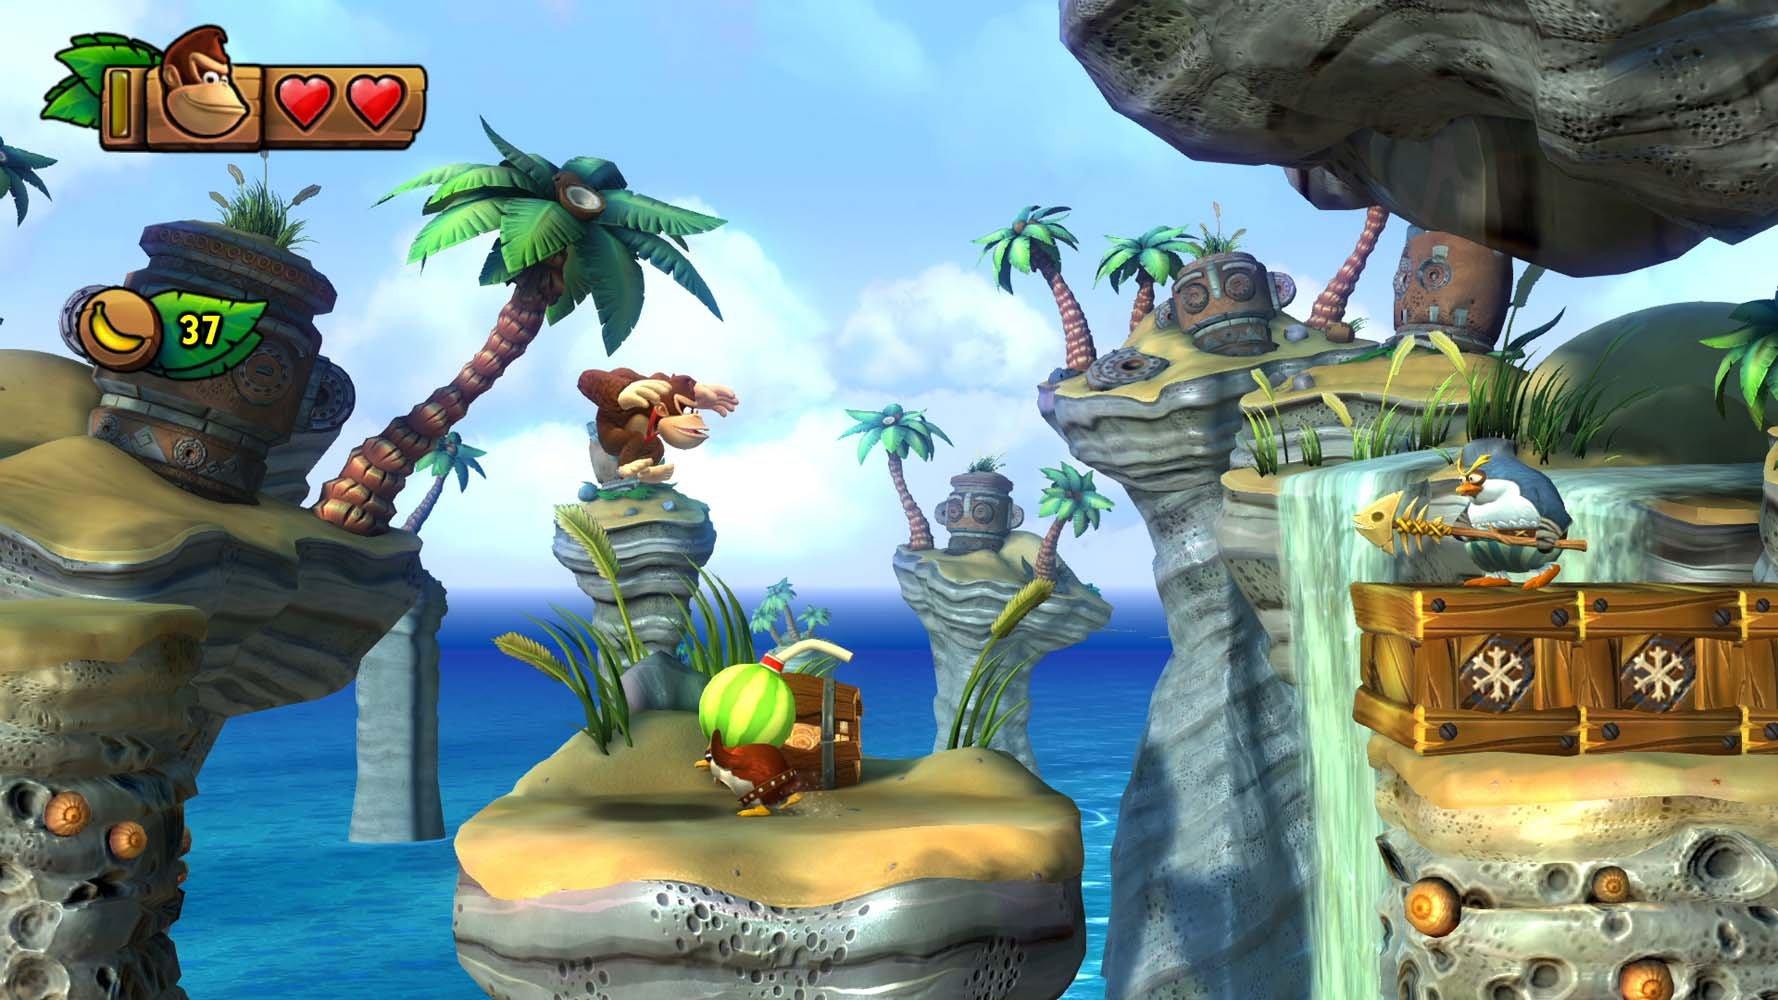 donkey kong country tropical freeze switch price